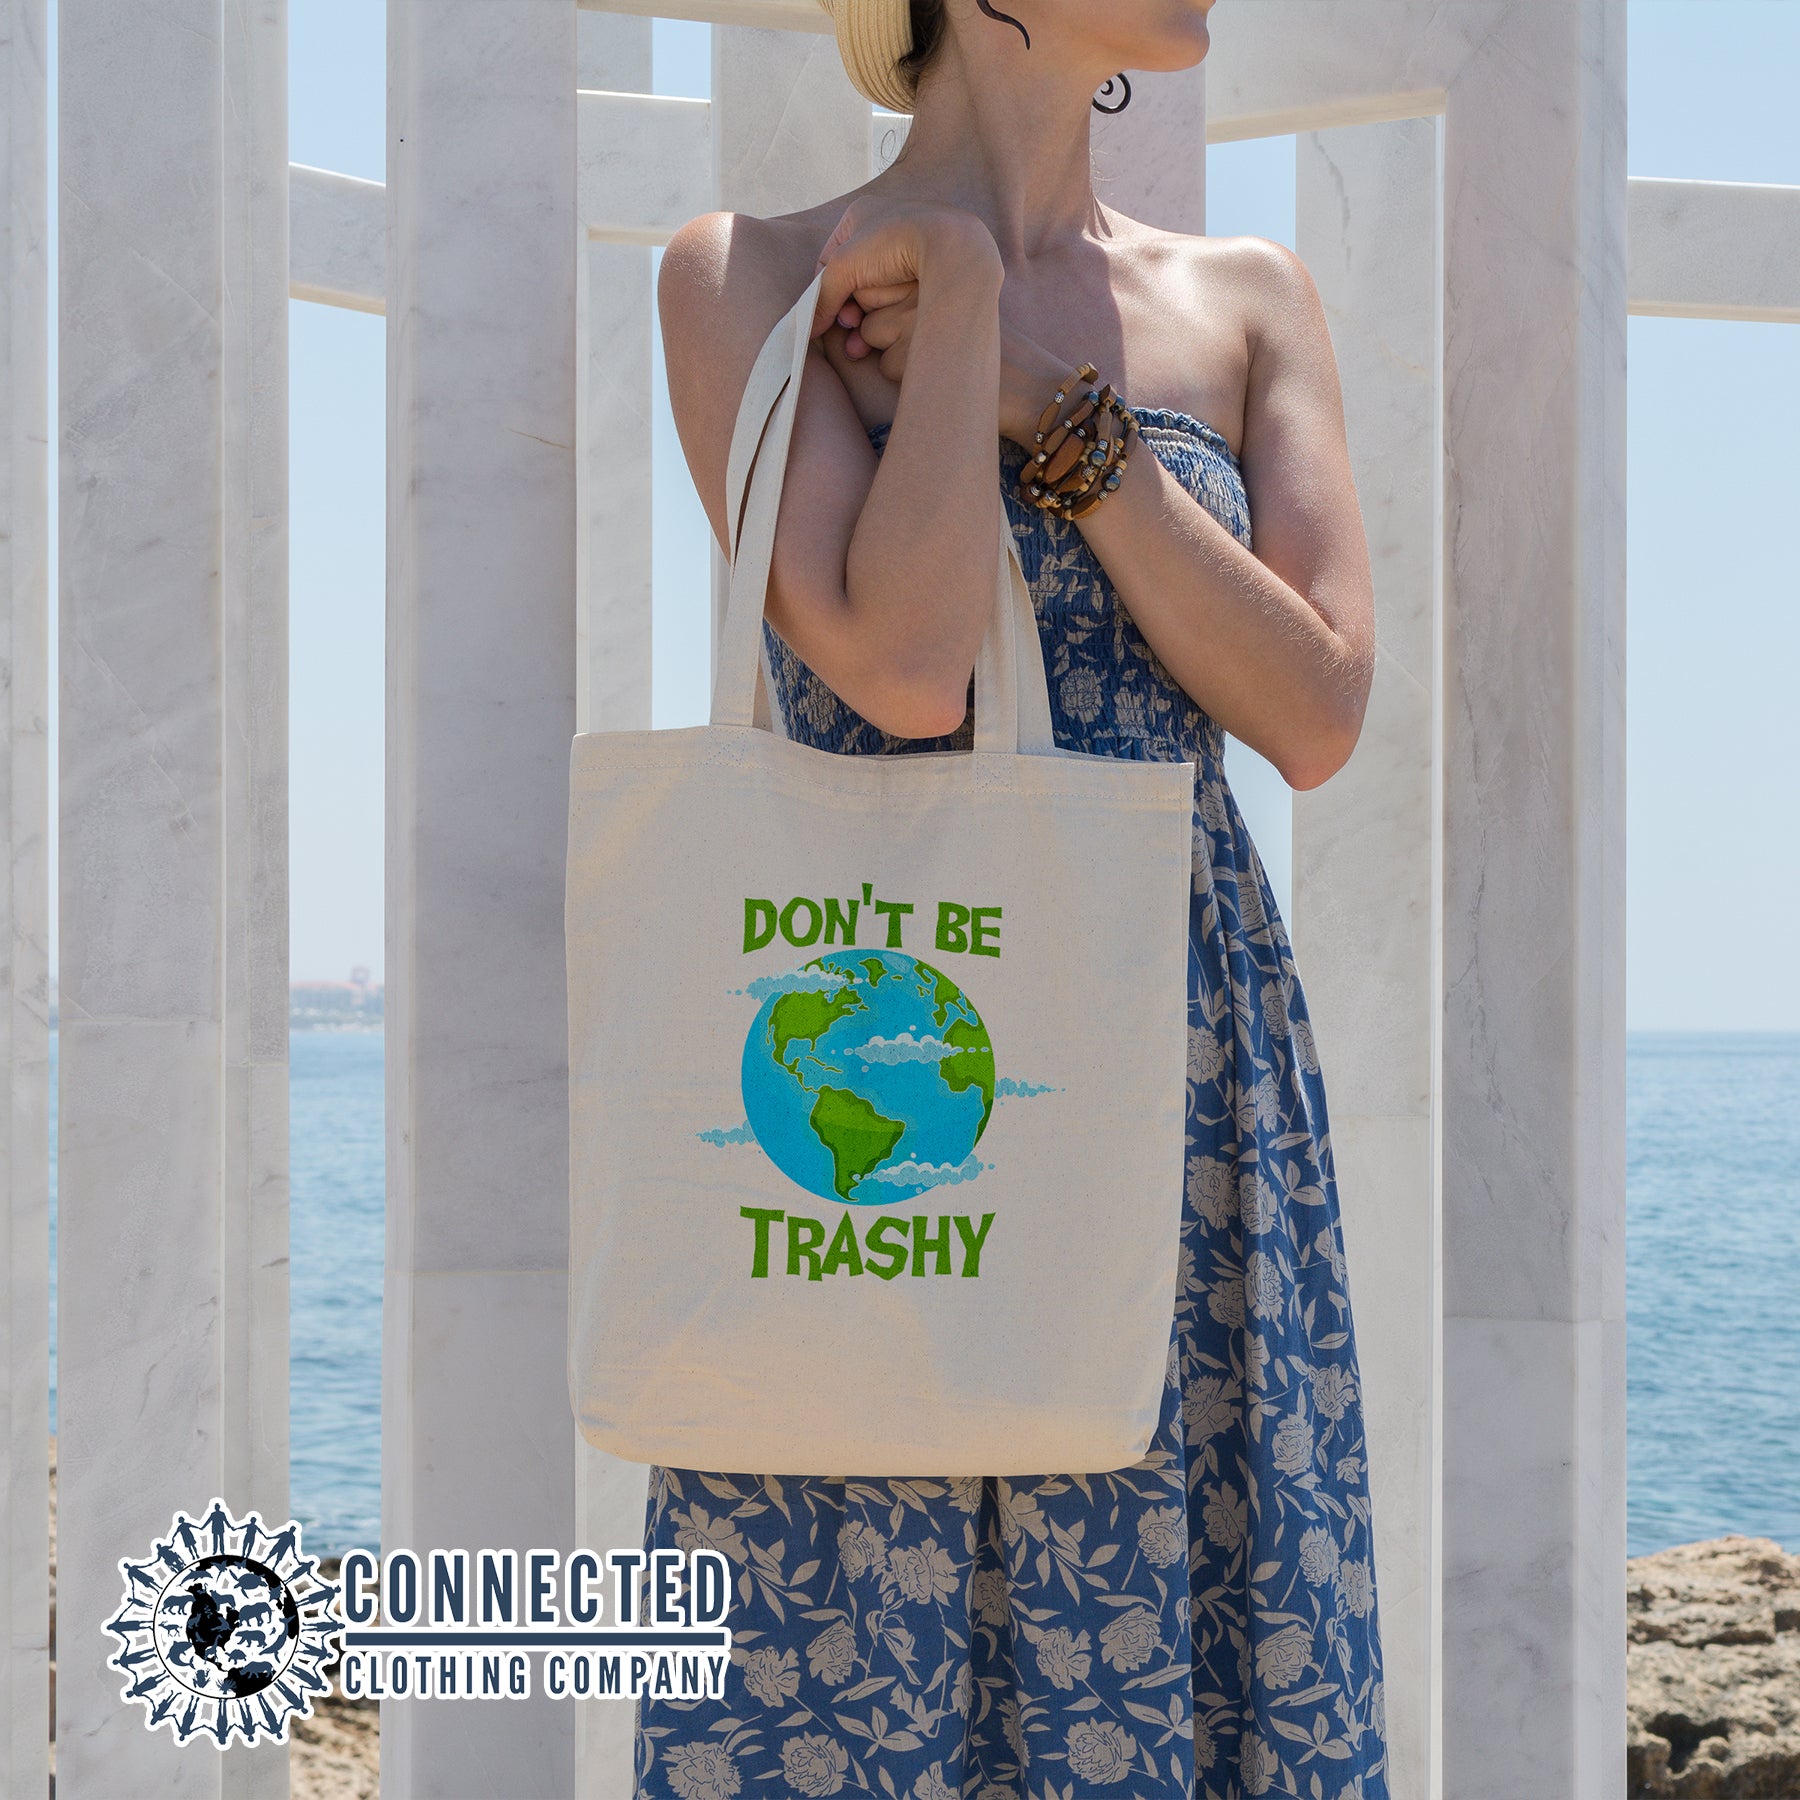 Don't Be Trashy Tote Bag - Connected Clothing Company - 10% of proceeds donated to mission blue ocean conservation